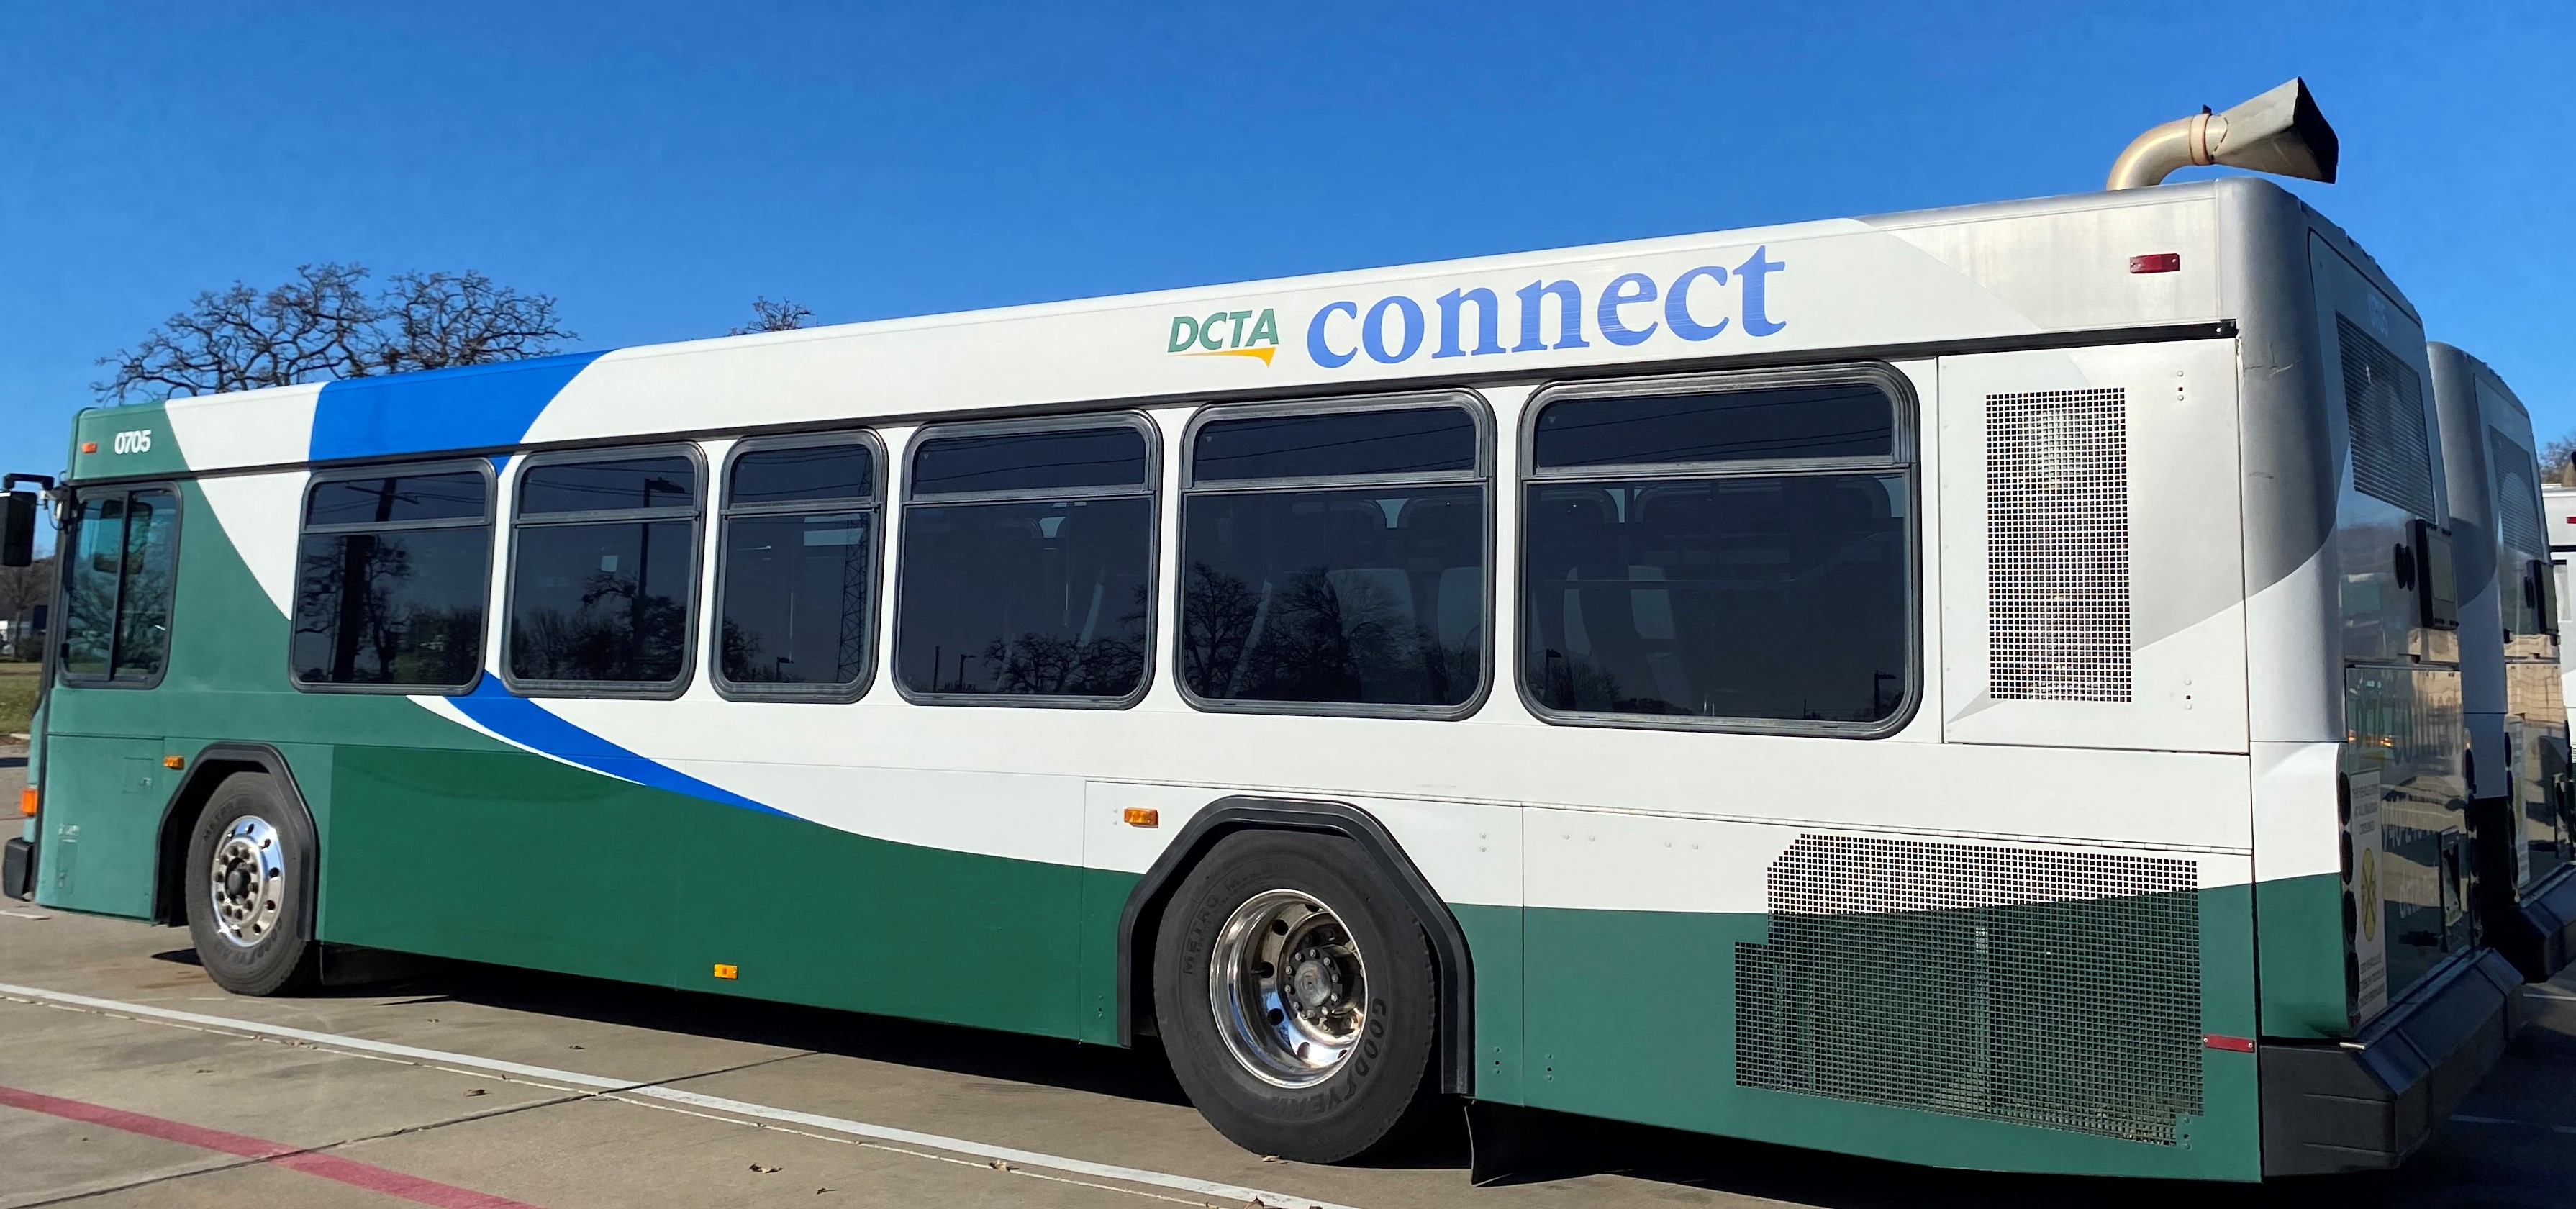 DCTA Sees Big Ridership Growth Across All Services